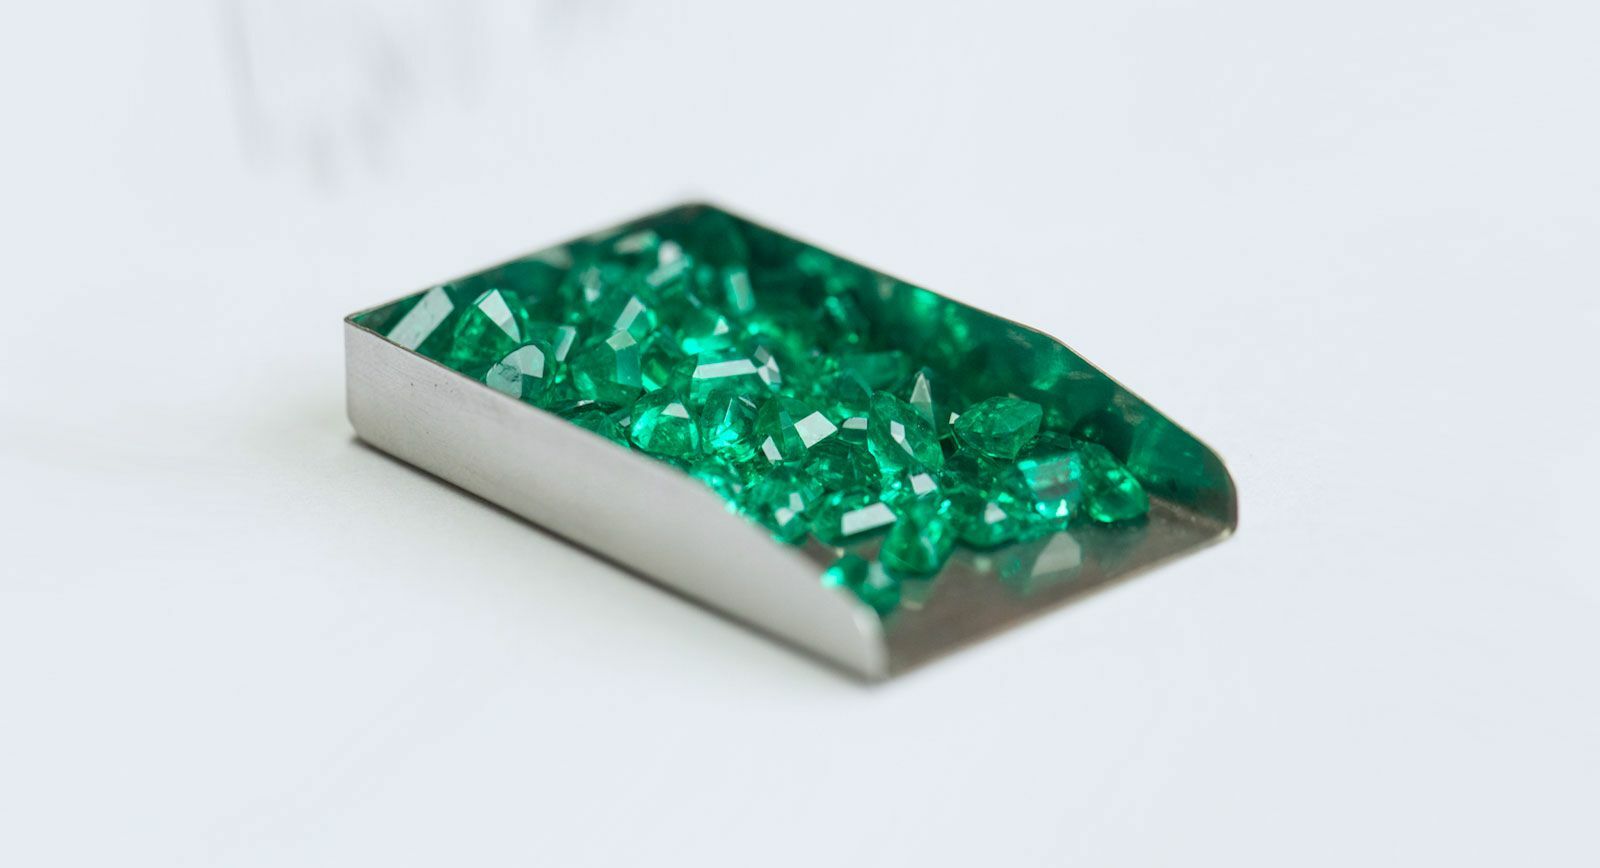 Behind the Scenes of the Emerald Mining Business